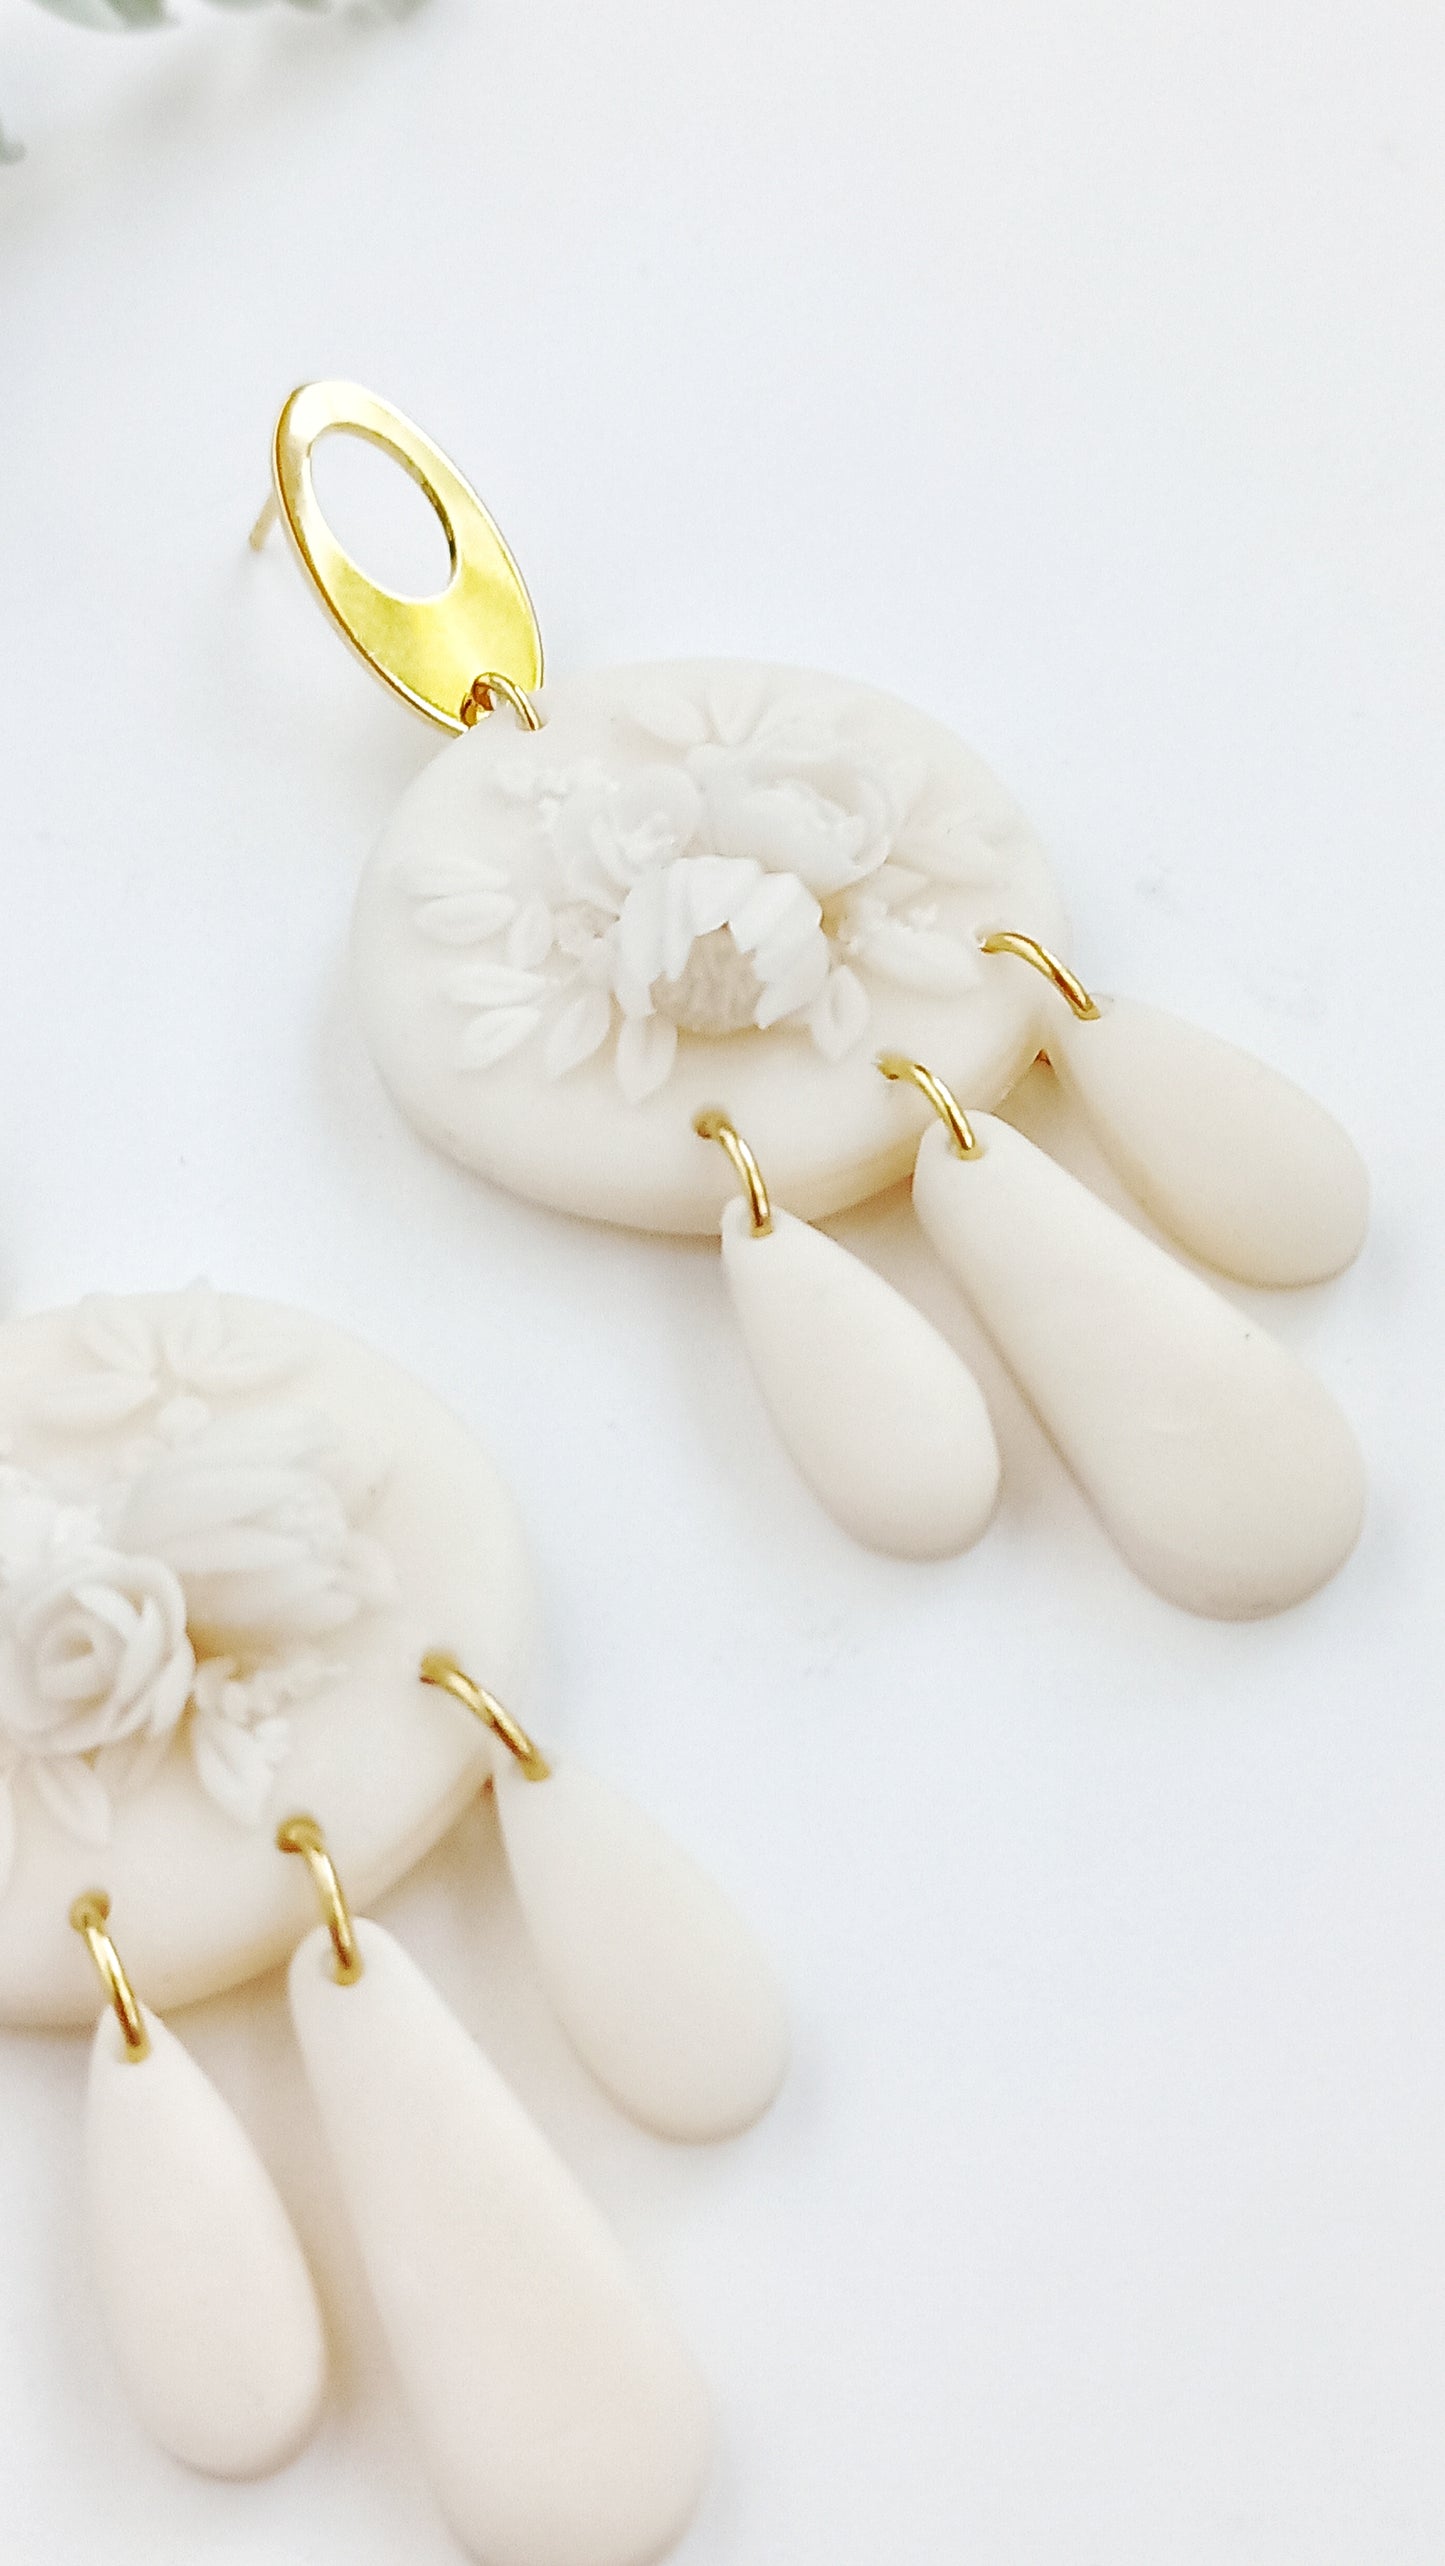 Chaska Protea - Medium Cricle earring with gold stainless steel oval